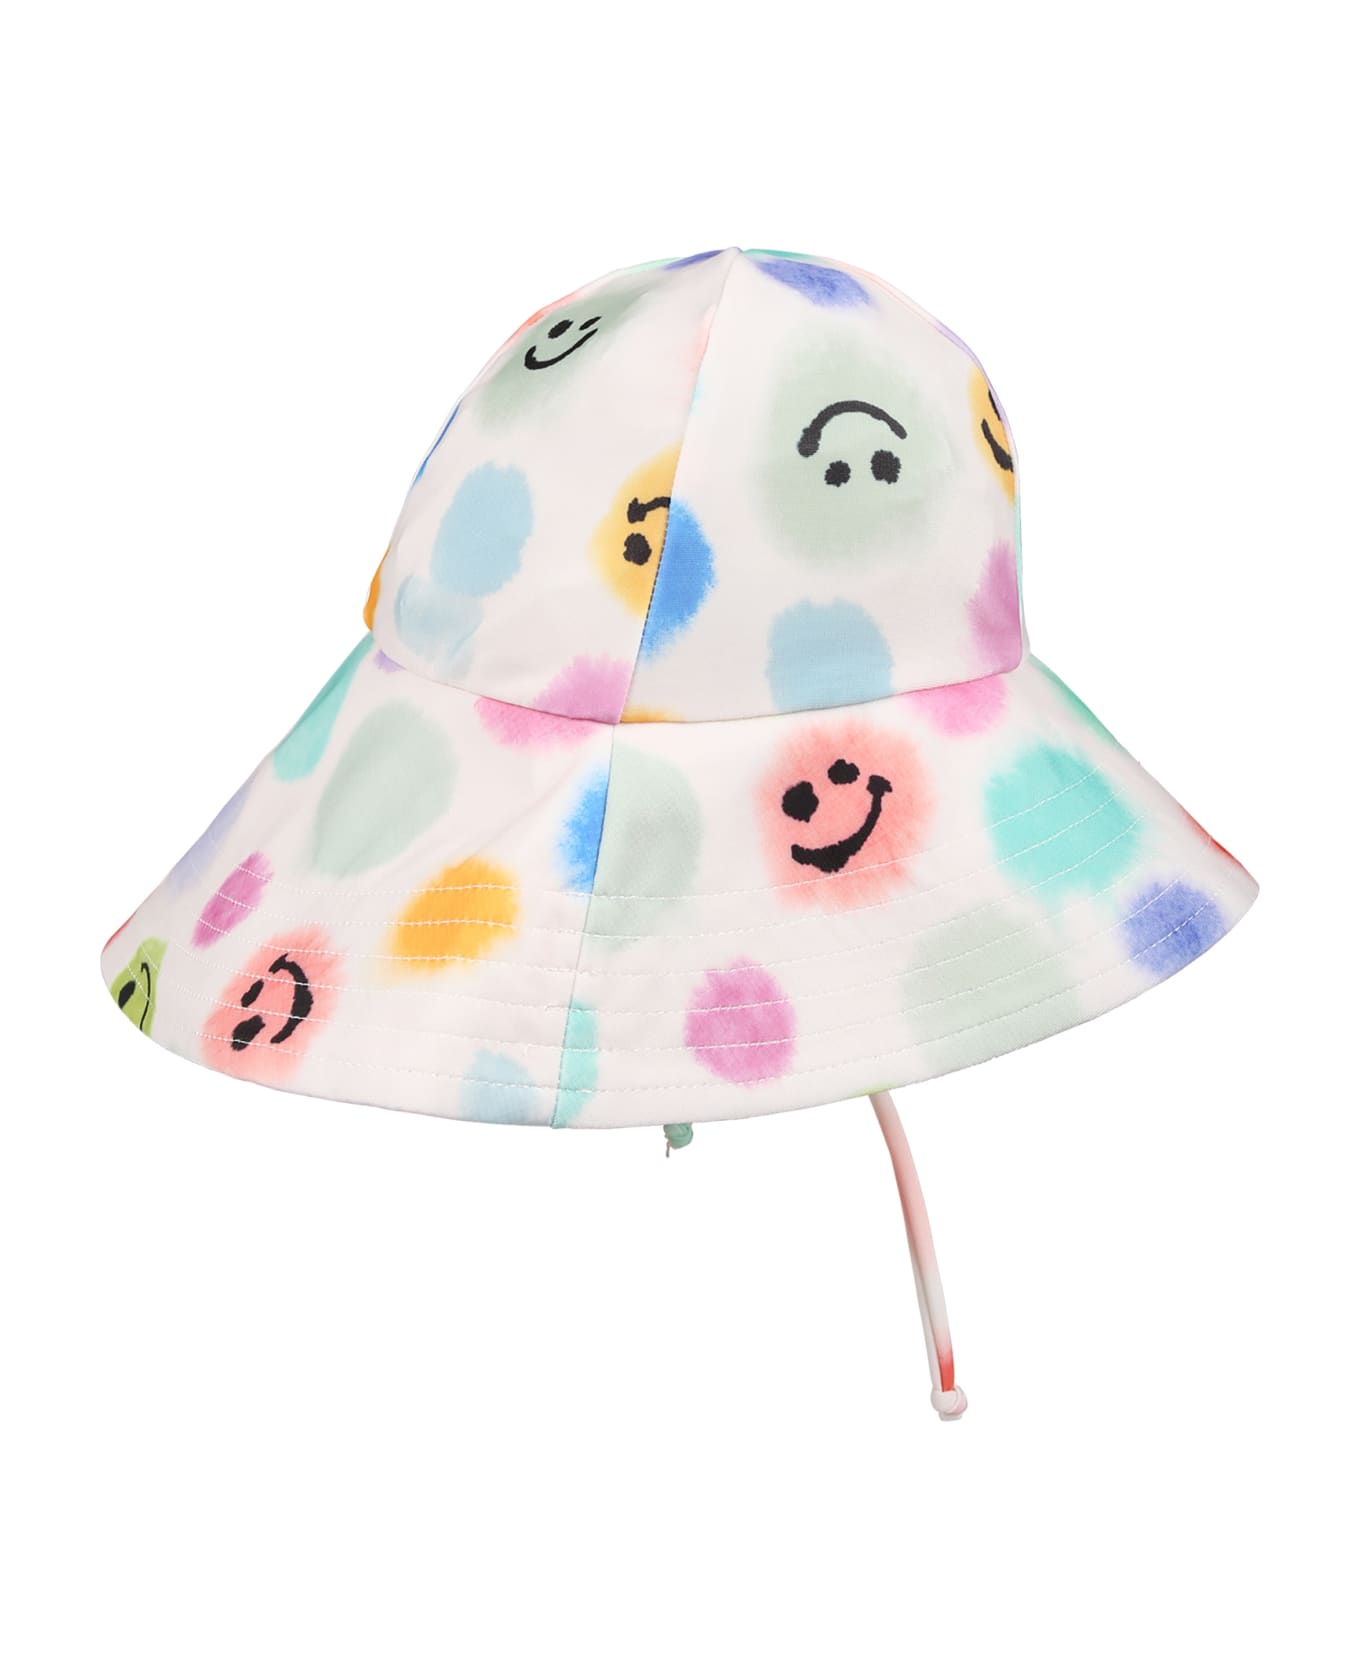 Molo White Cloche For Kids With Smiley - Multicolor アクセサリー＆ギフト